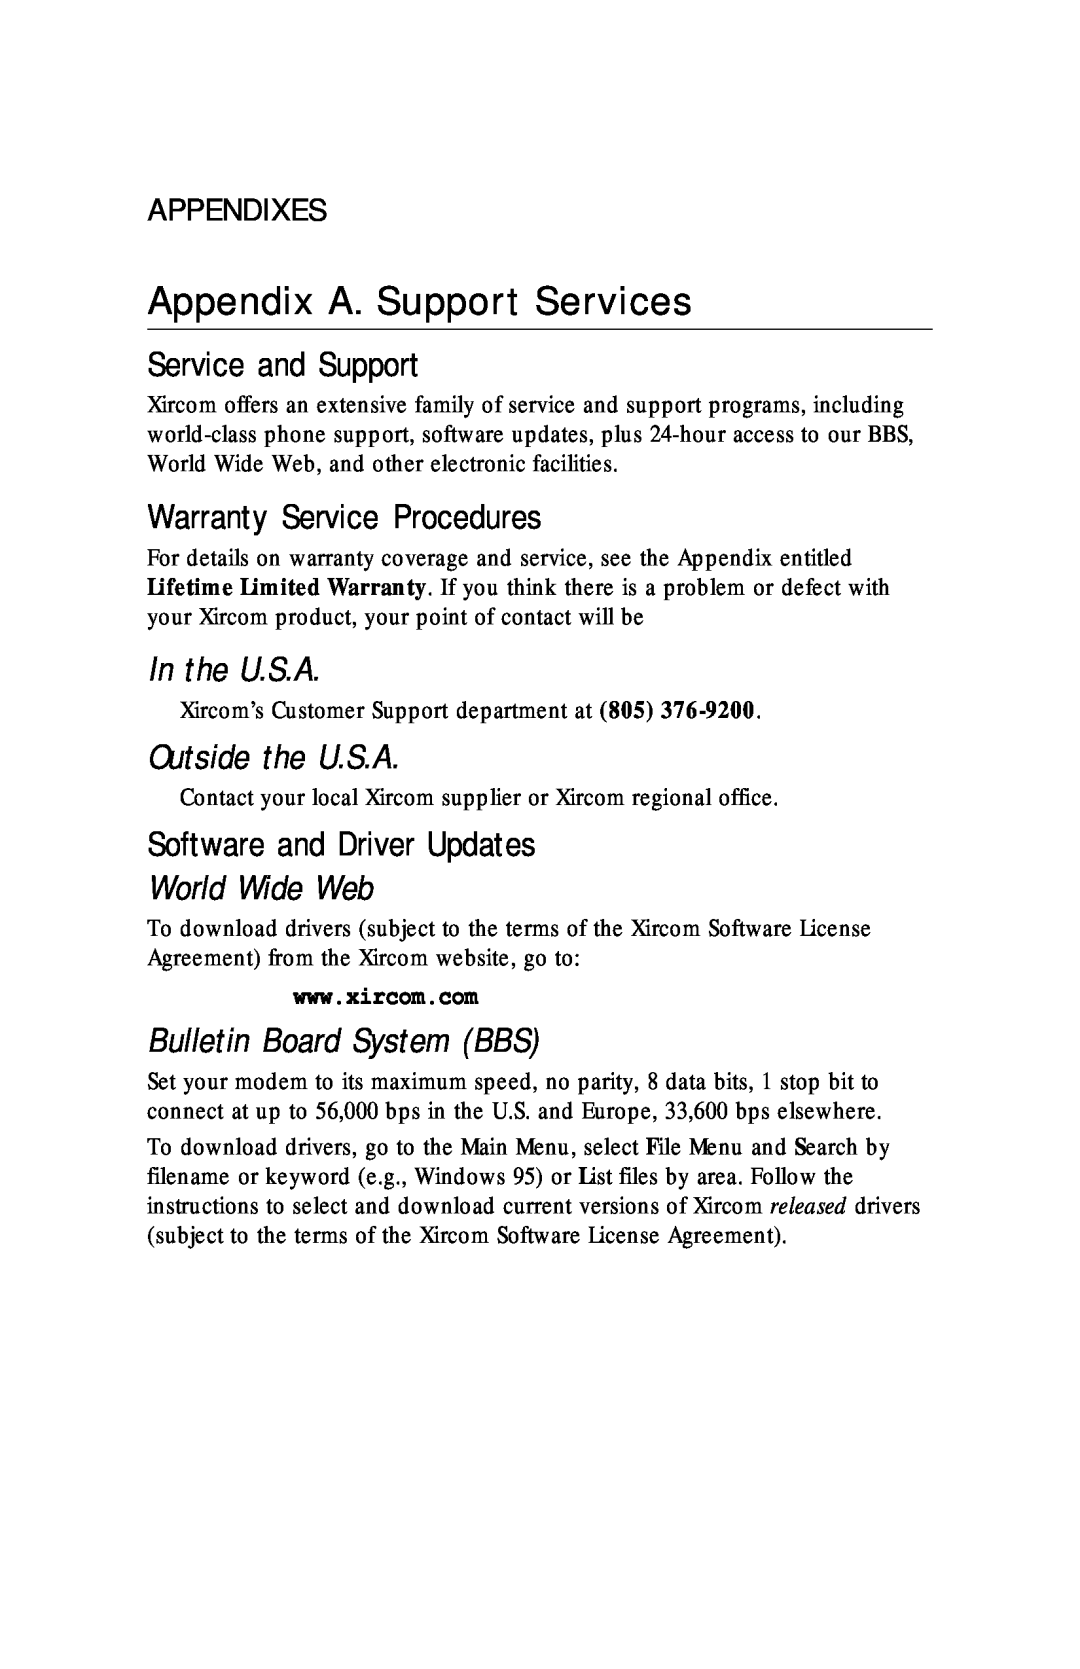 Xircom RM56V1 Appendix A. Support Services, Service and Support, Warranty Service Procedures, In the U.S.A, World Wide Web 